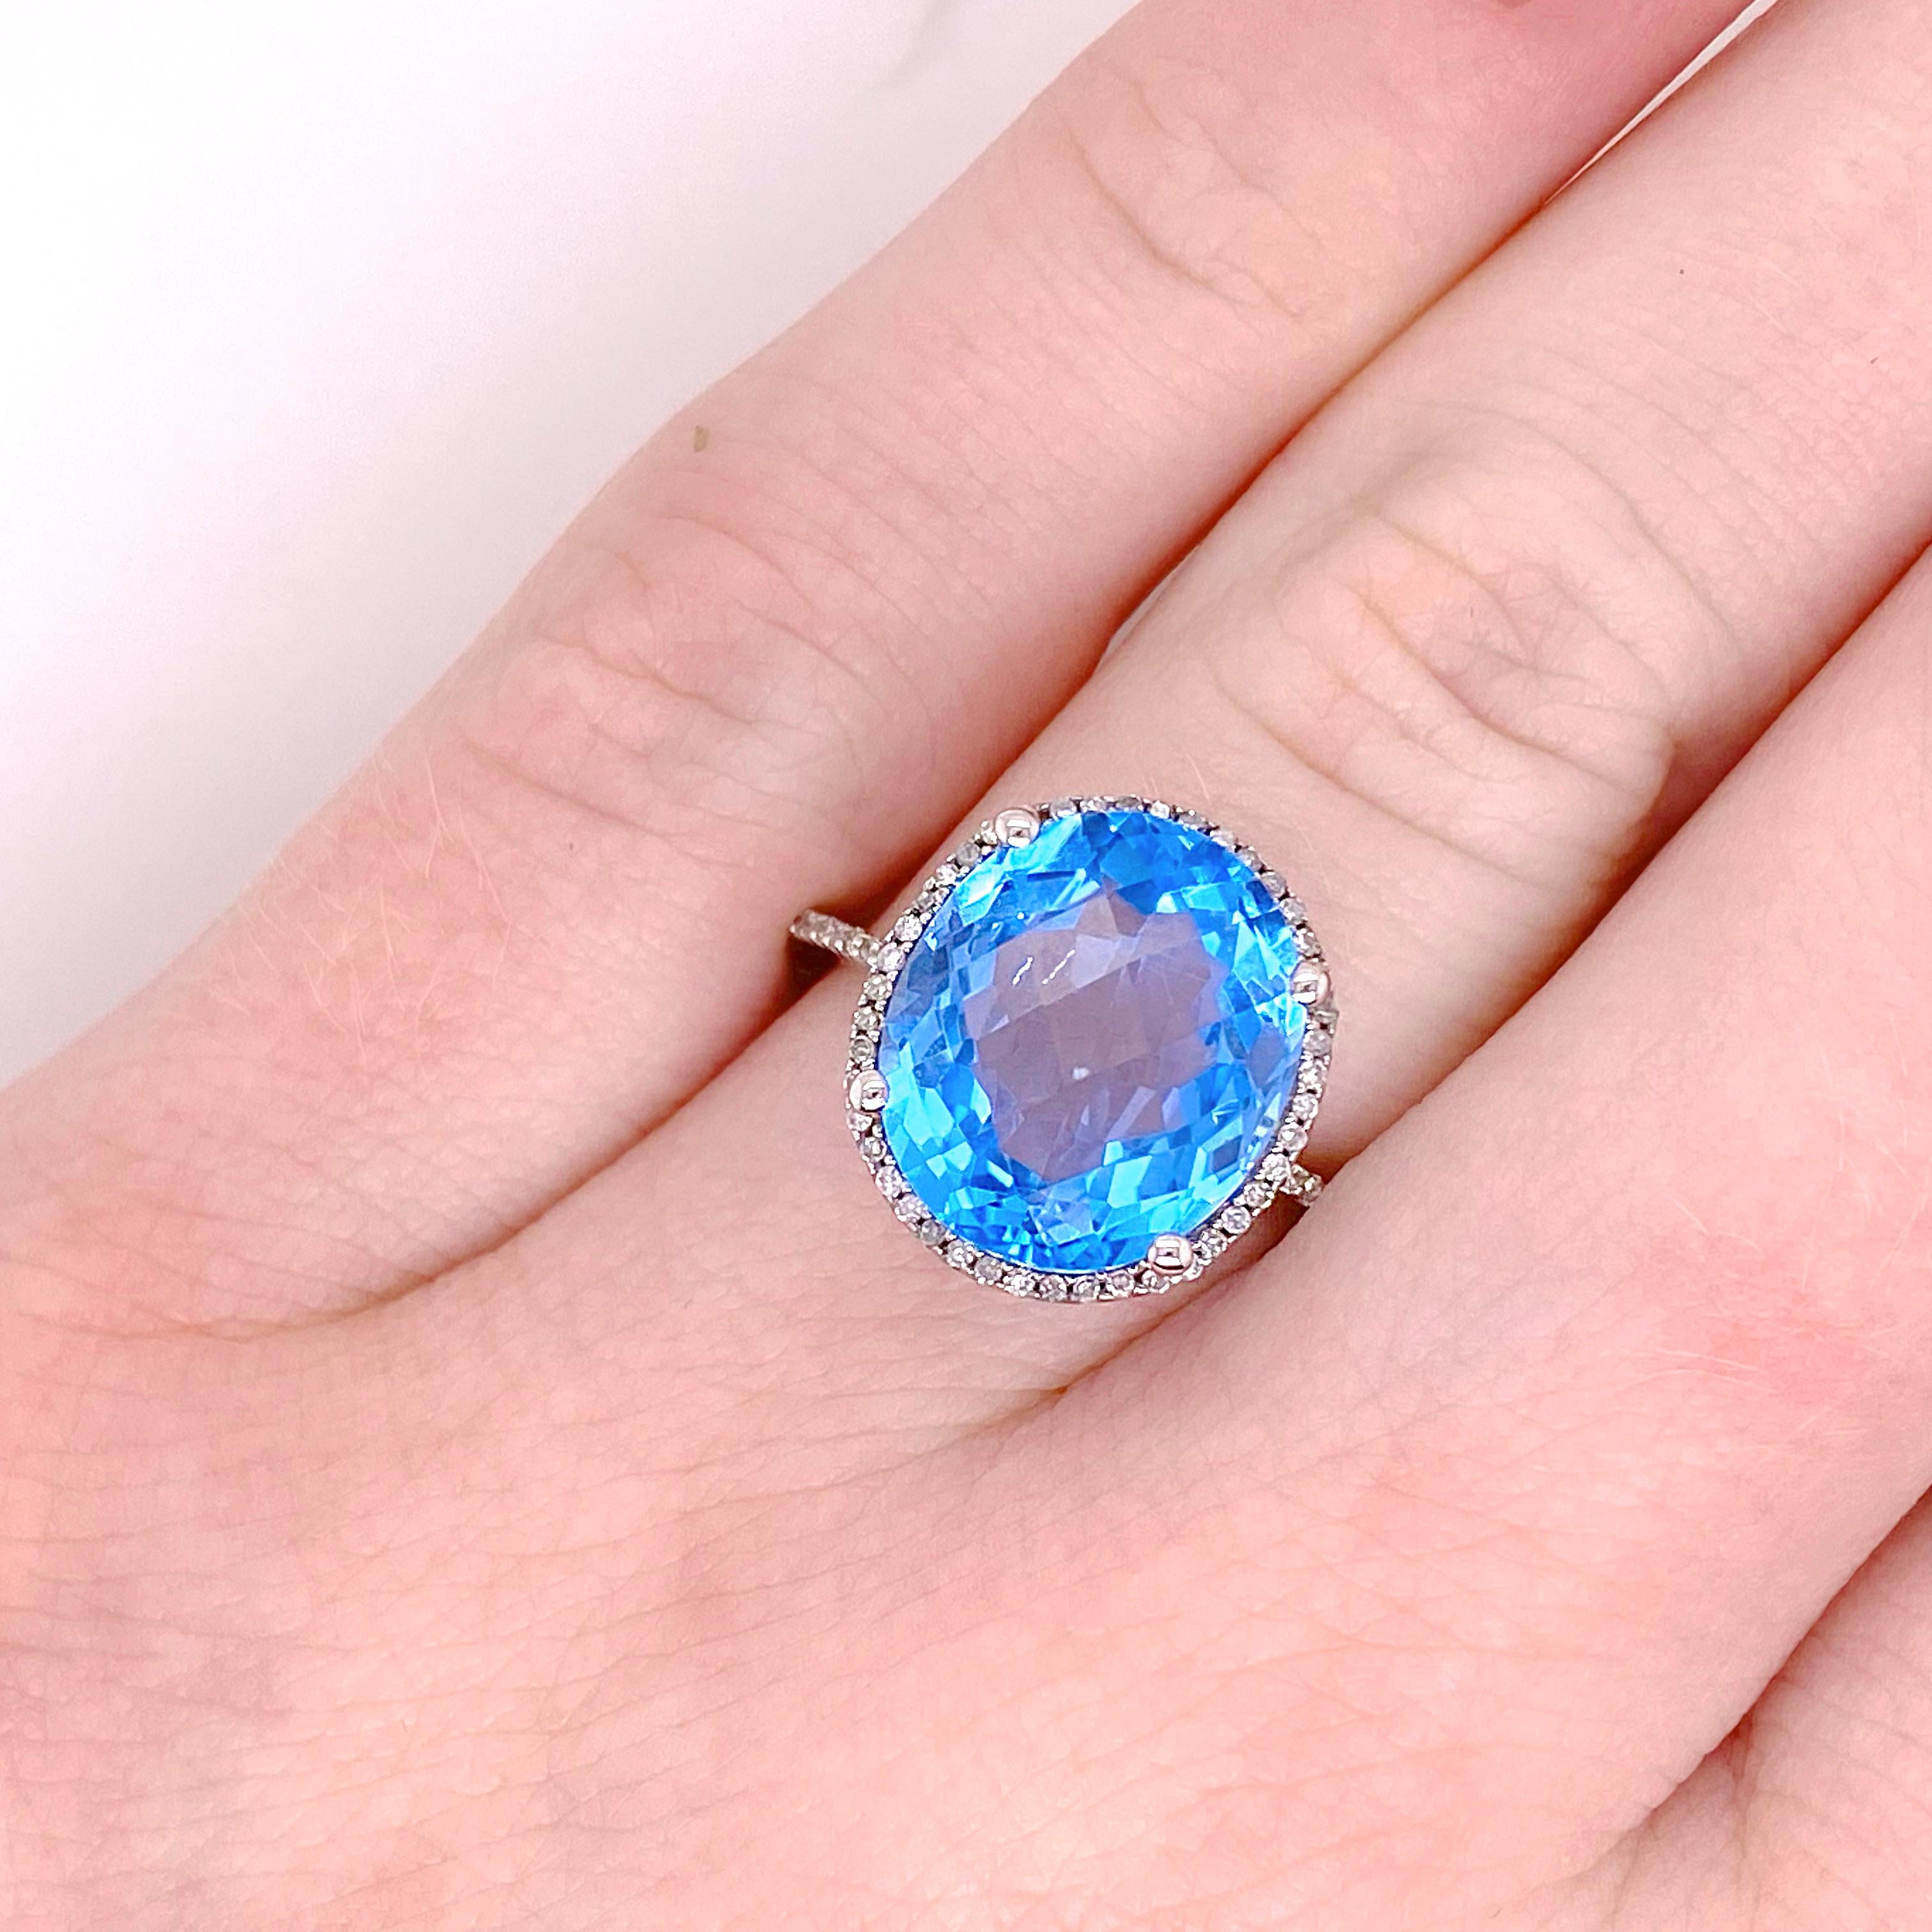 The gorgeous blue topaz and diamond ring has a very unique diamond prong settings. The blue topaz has a diamond halo around it as well as on the basket and prongs. This ring is covered in diamonds! This would make a great addition to any fine